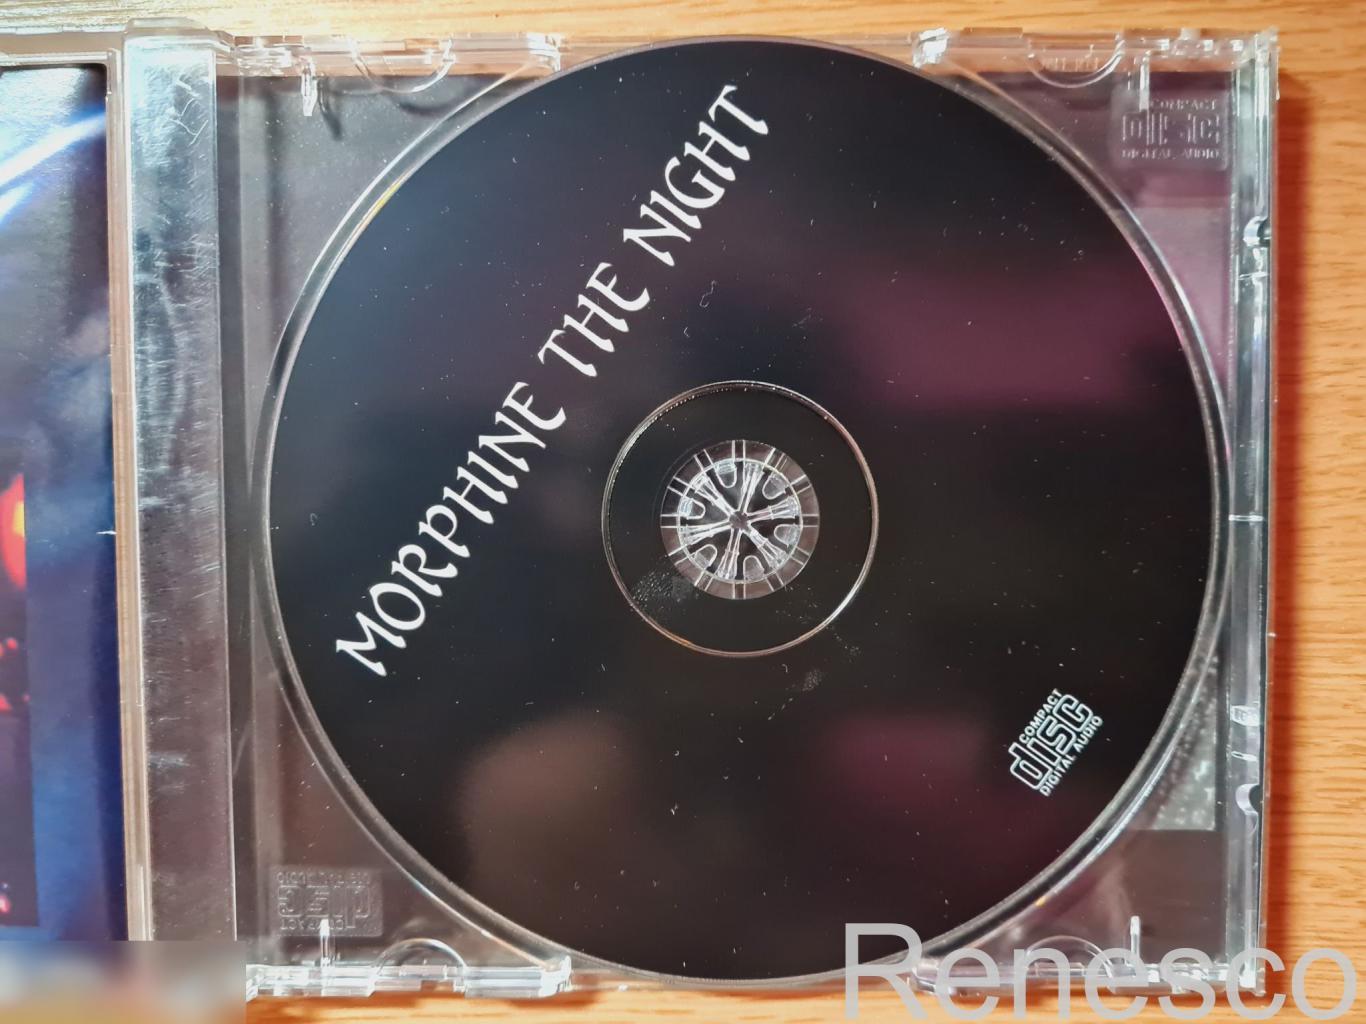 Morphine ?– The Night (Russia) (Unofficial Release) 4